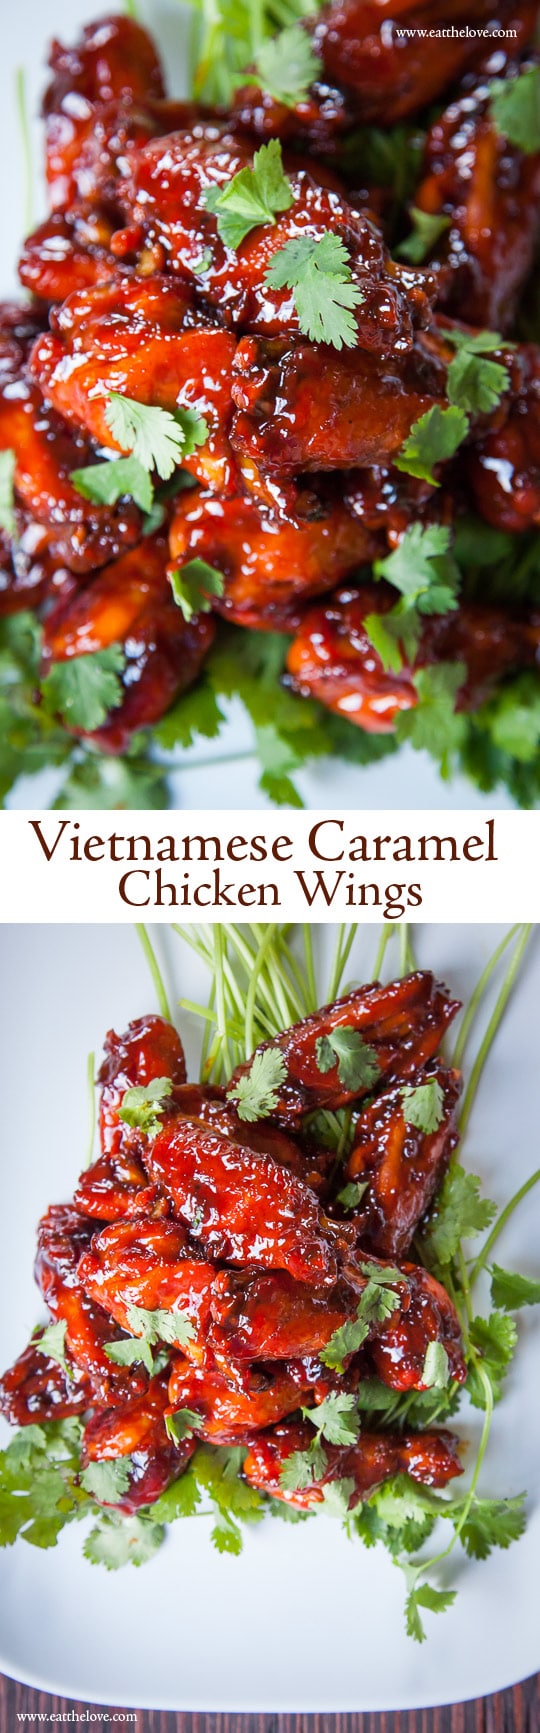 Easy Vietnamese Caramel Chicken Wings. Photo and recipe by Irvin Lin of Eat the Love.